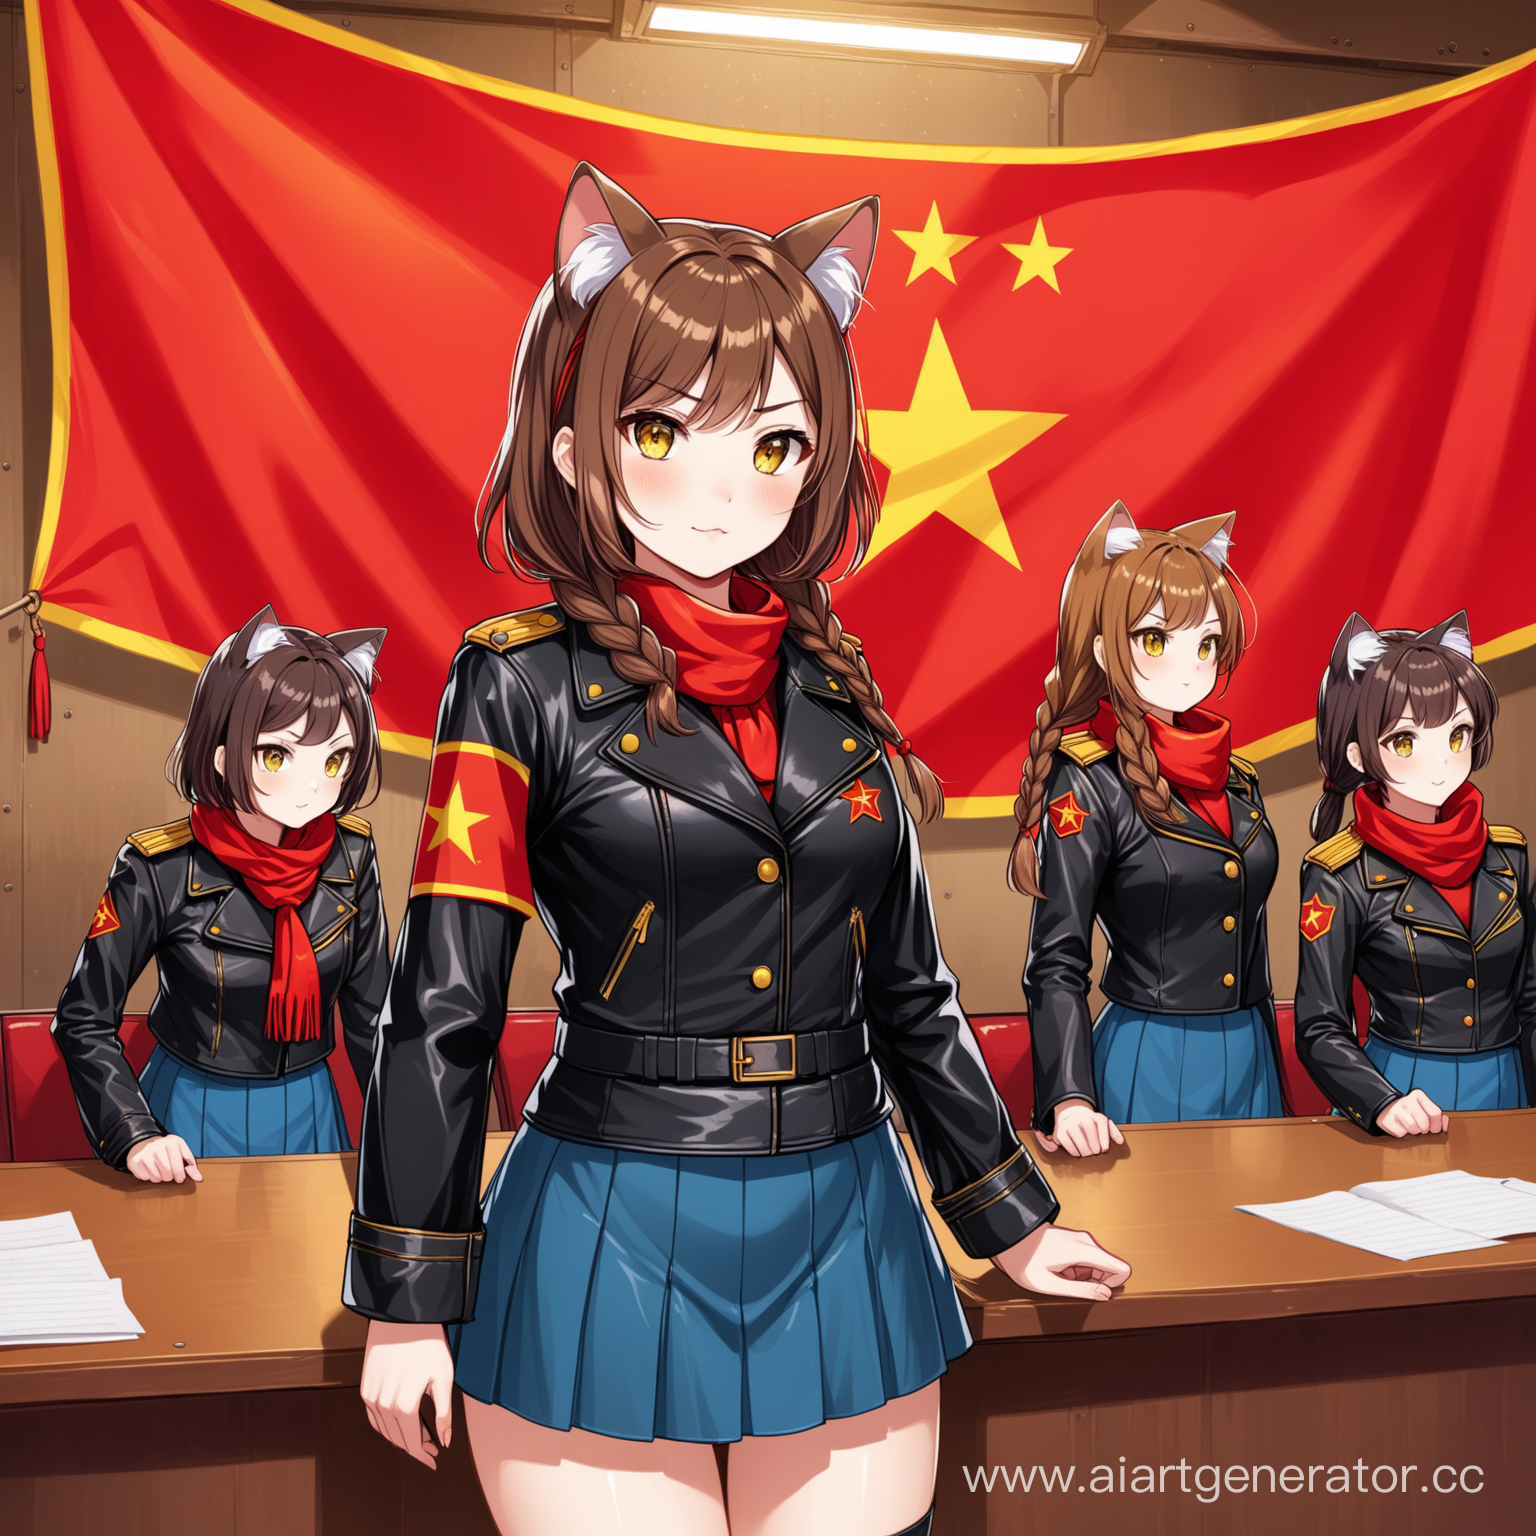 Catgirl yellow eyes brown hair (one short braid), brown cat ears, short blue skirt, black leather jacket with red armband.  Communist squad Communist room with red communist flags